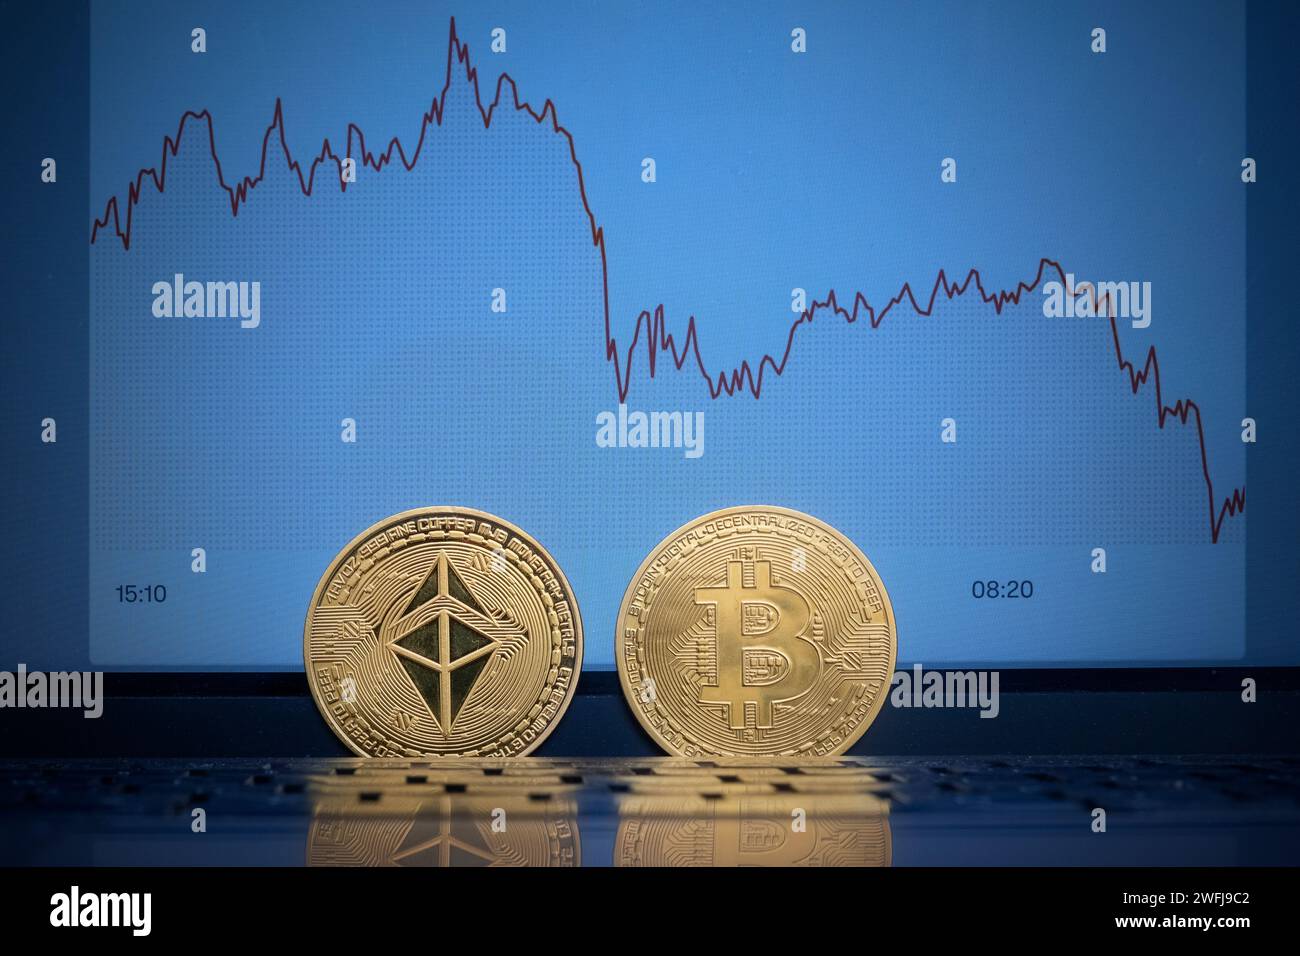 Ethereum and Bitcoin coin in front of a Bitcoin chart Stock Photo